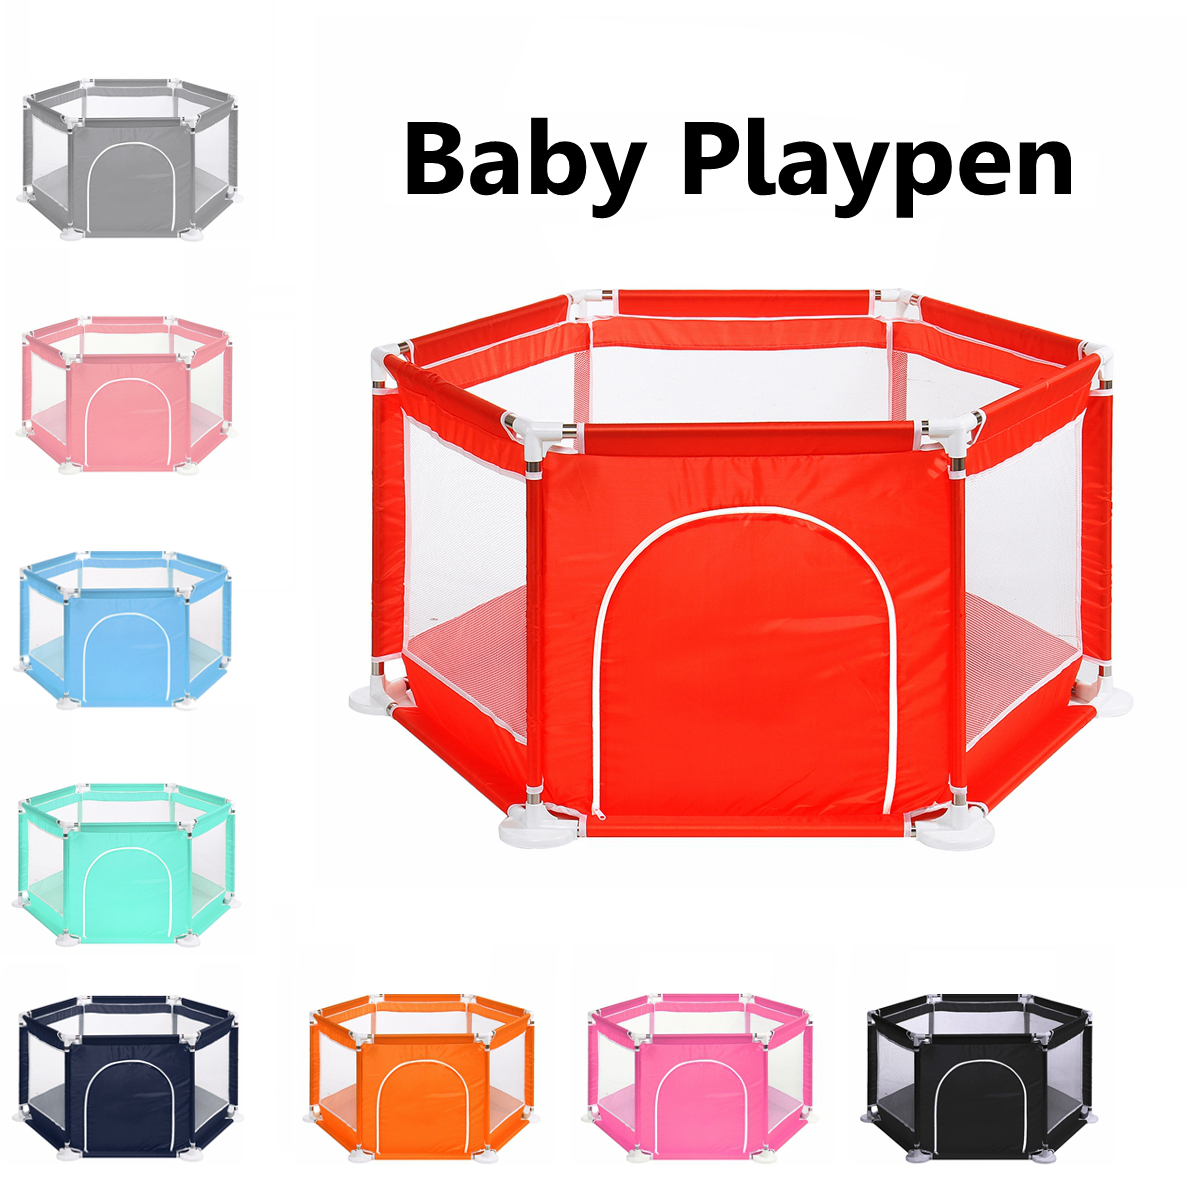 

6 Sided Baby Playpen Playing house Interactive Kids Toddler Room With Safety Gate Decorations